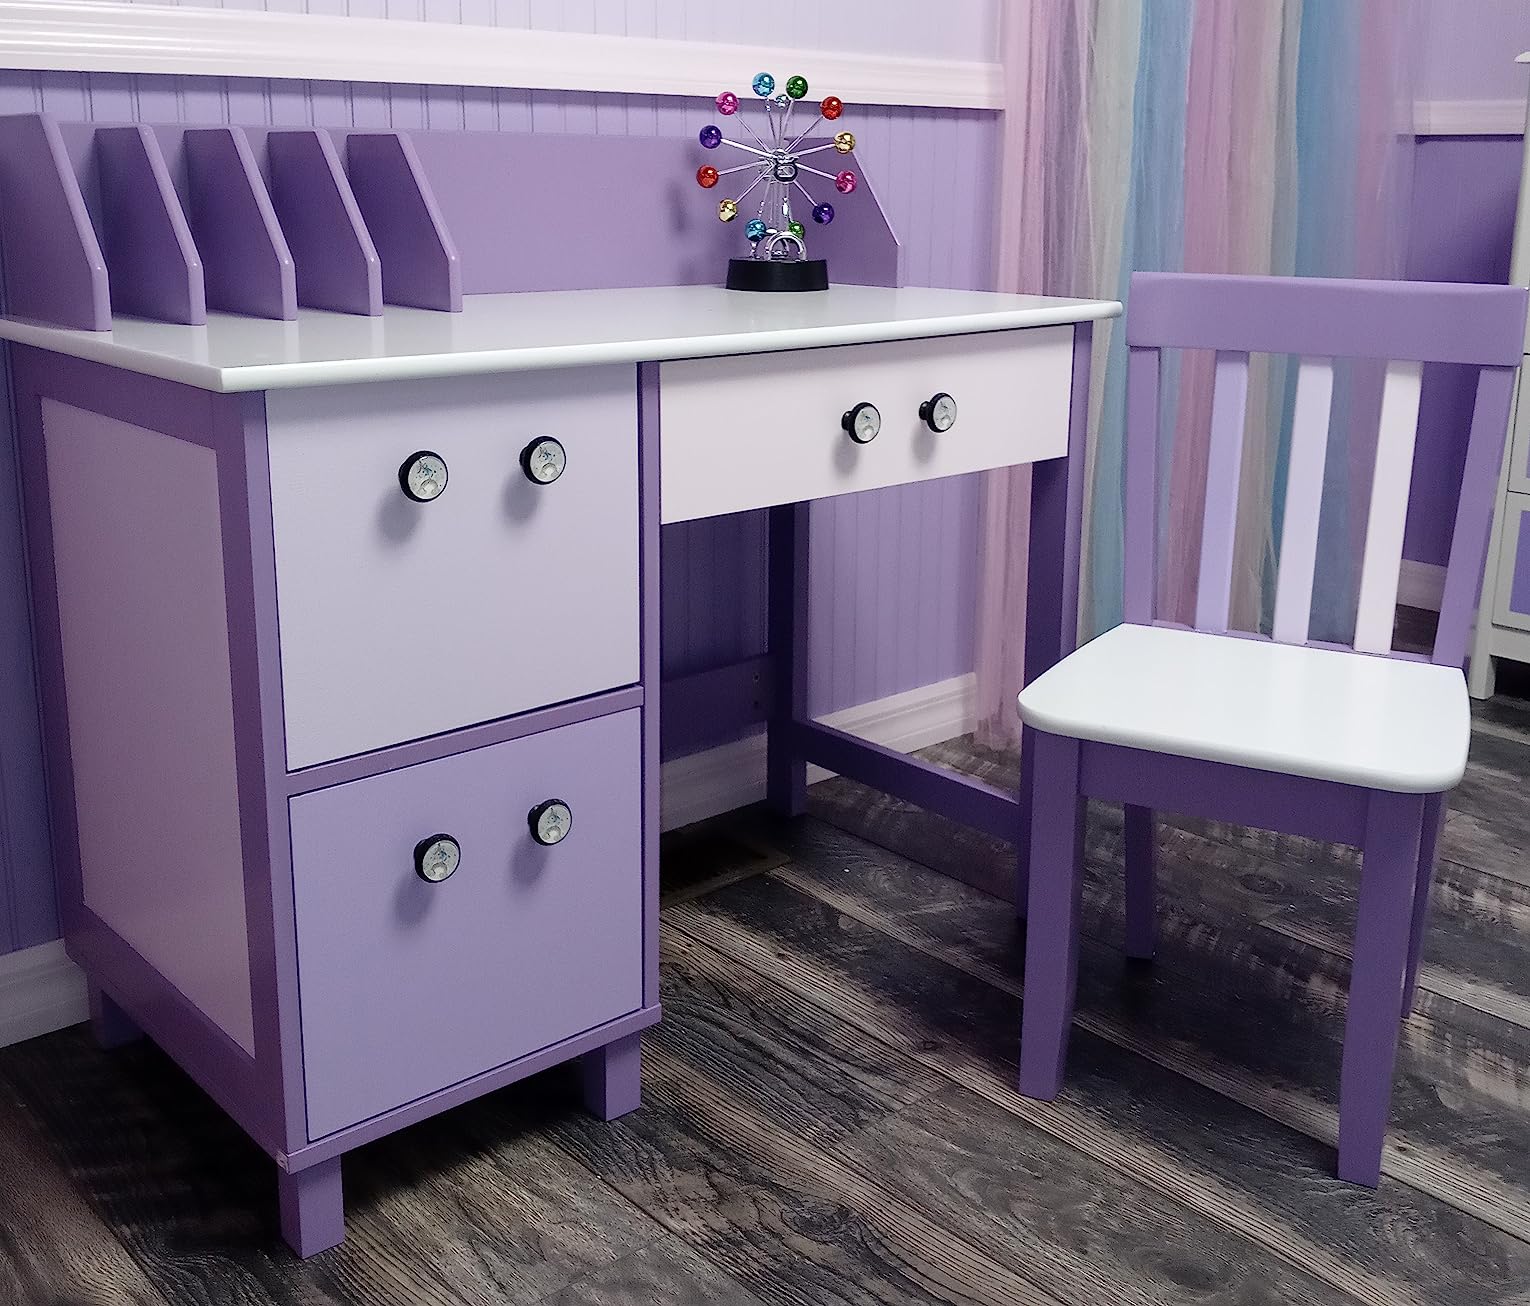  KidKraft Study Desk with Chair - Lavender, Drawers